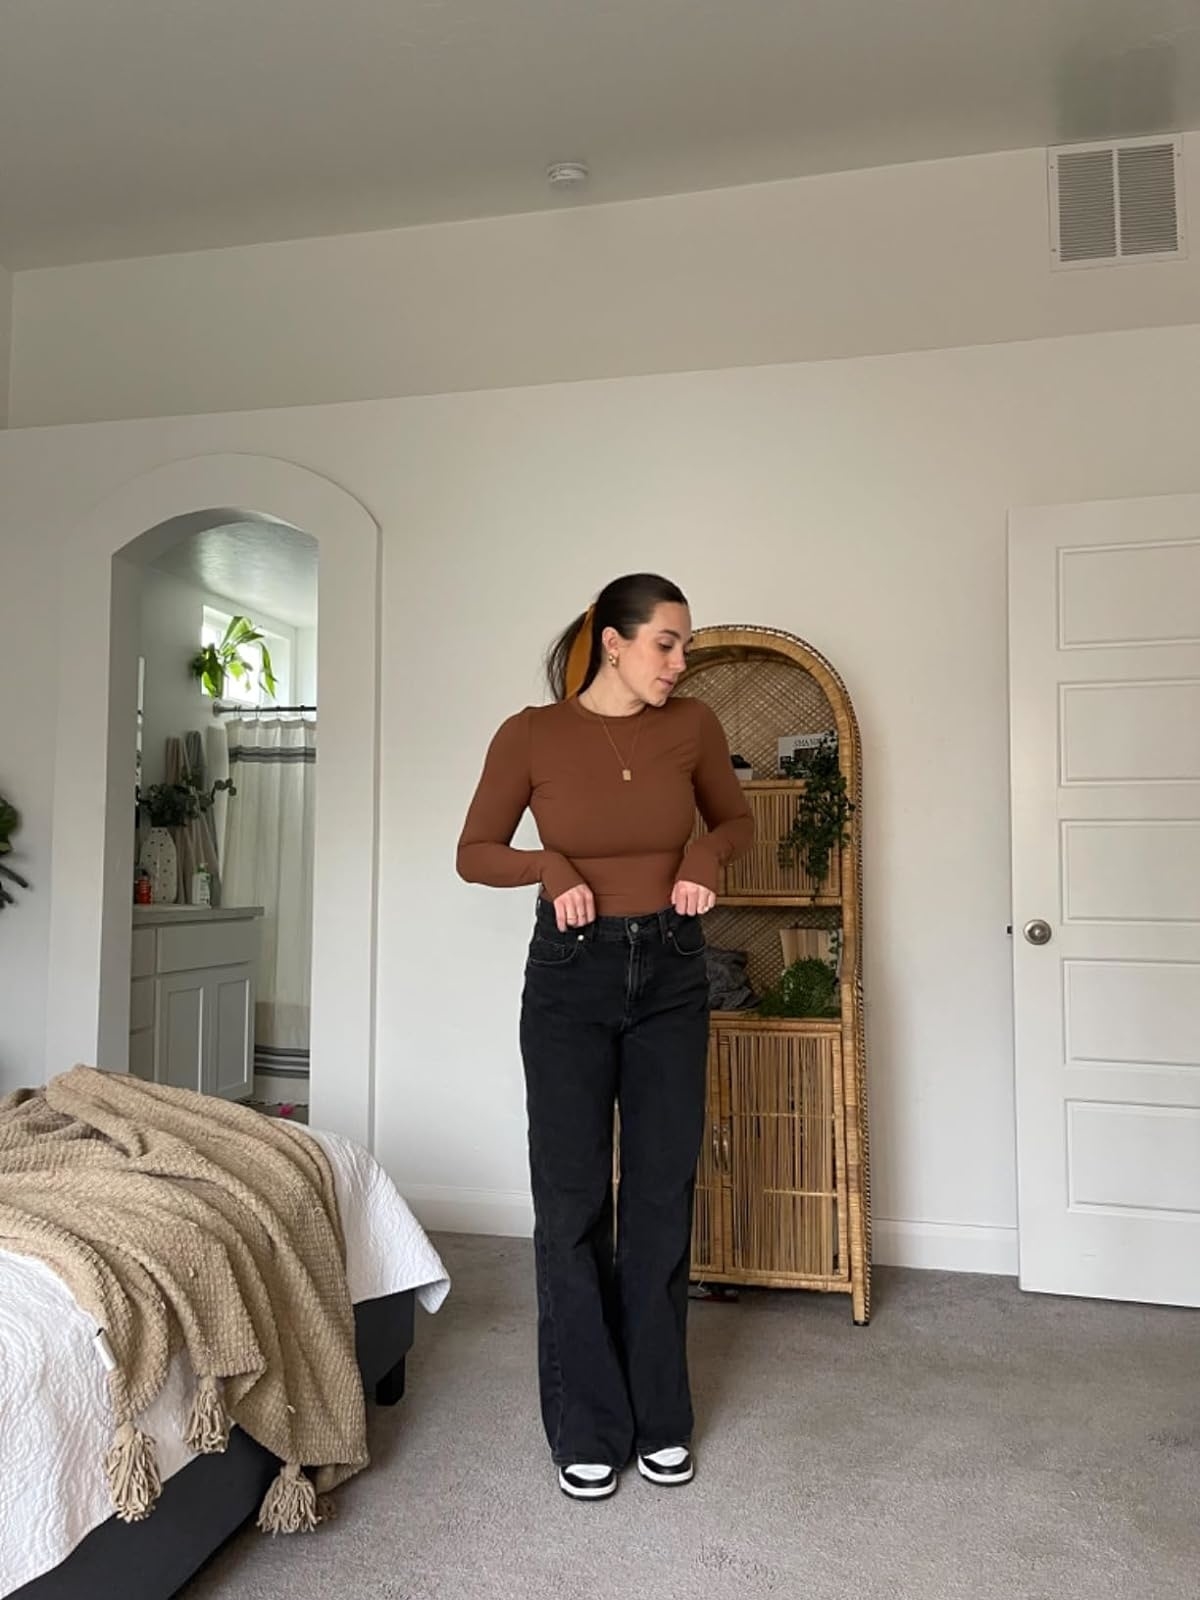 Individual in a fitted brown top and black jeans stands in a bedroom with minimal decor, near a rattan mirror